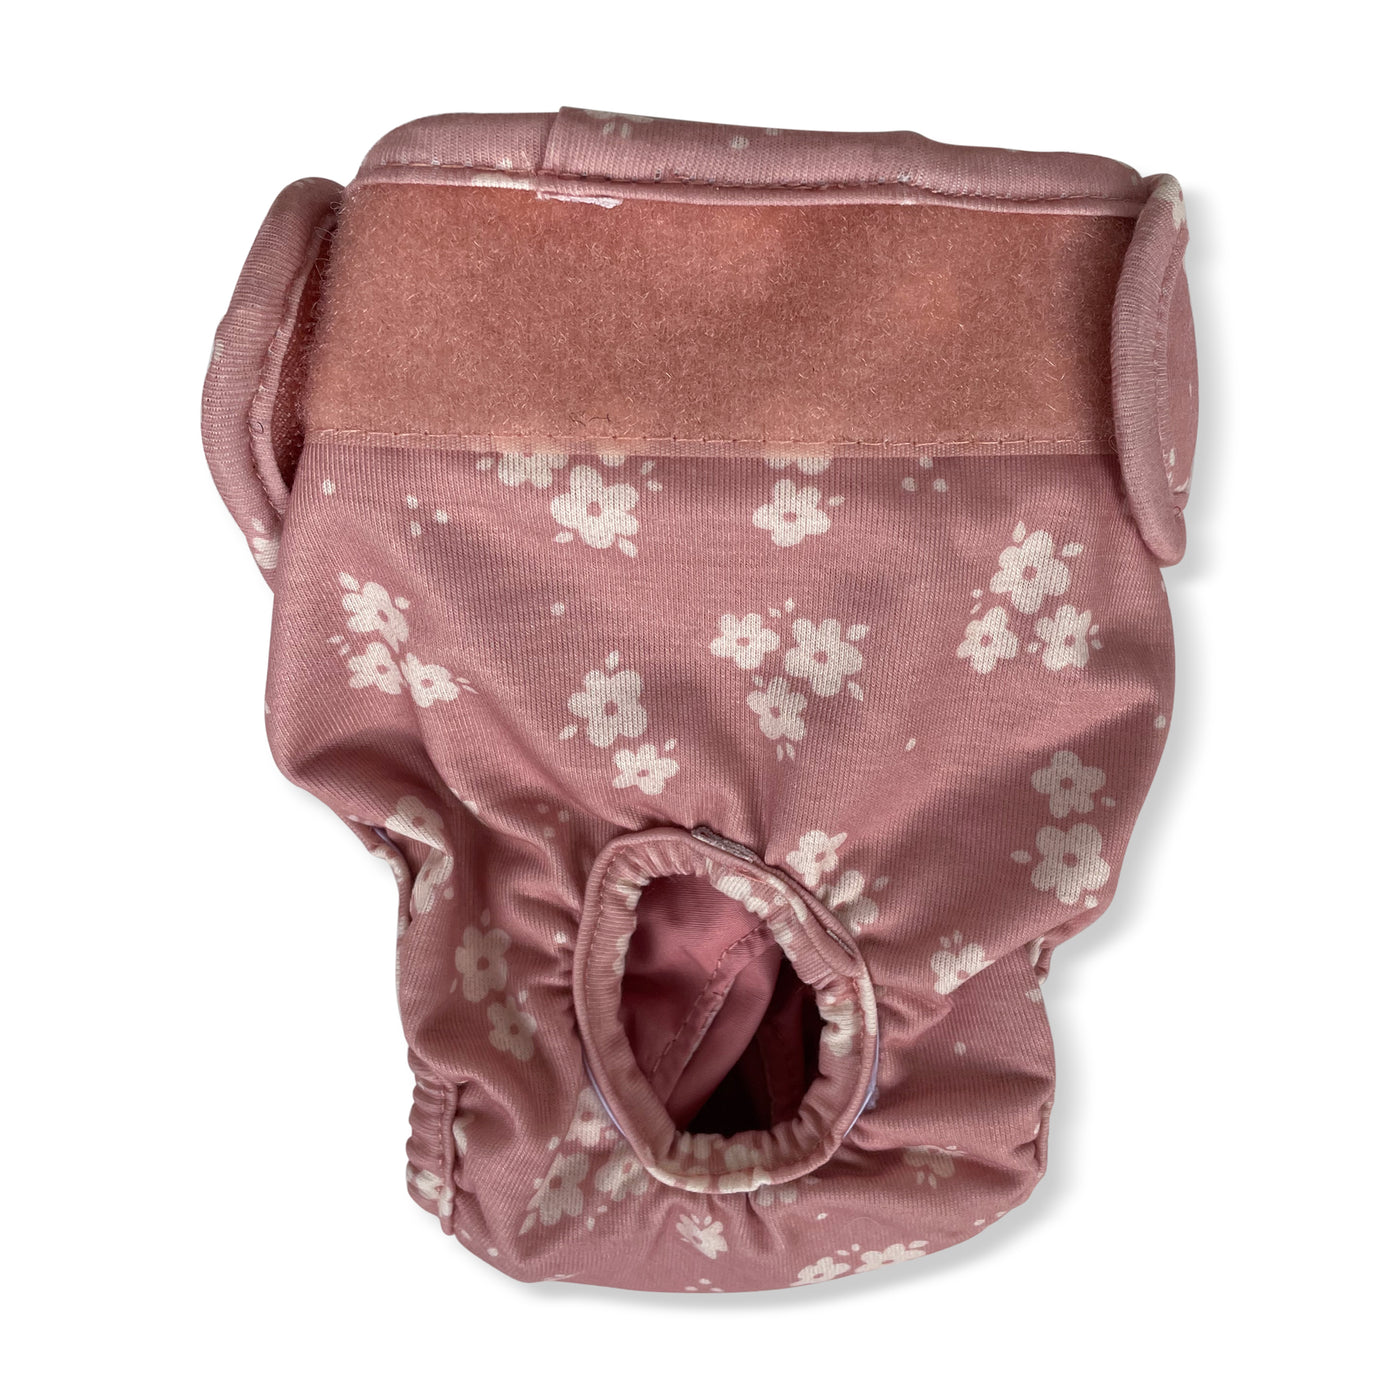 NEW: Running trousers old pink with flower